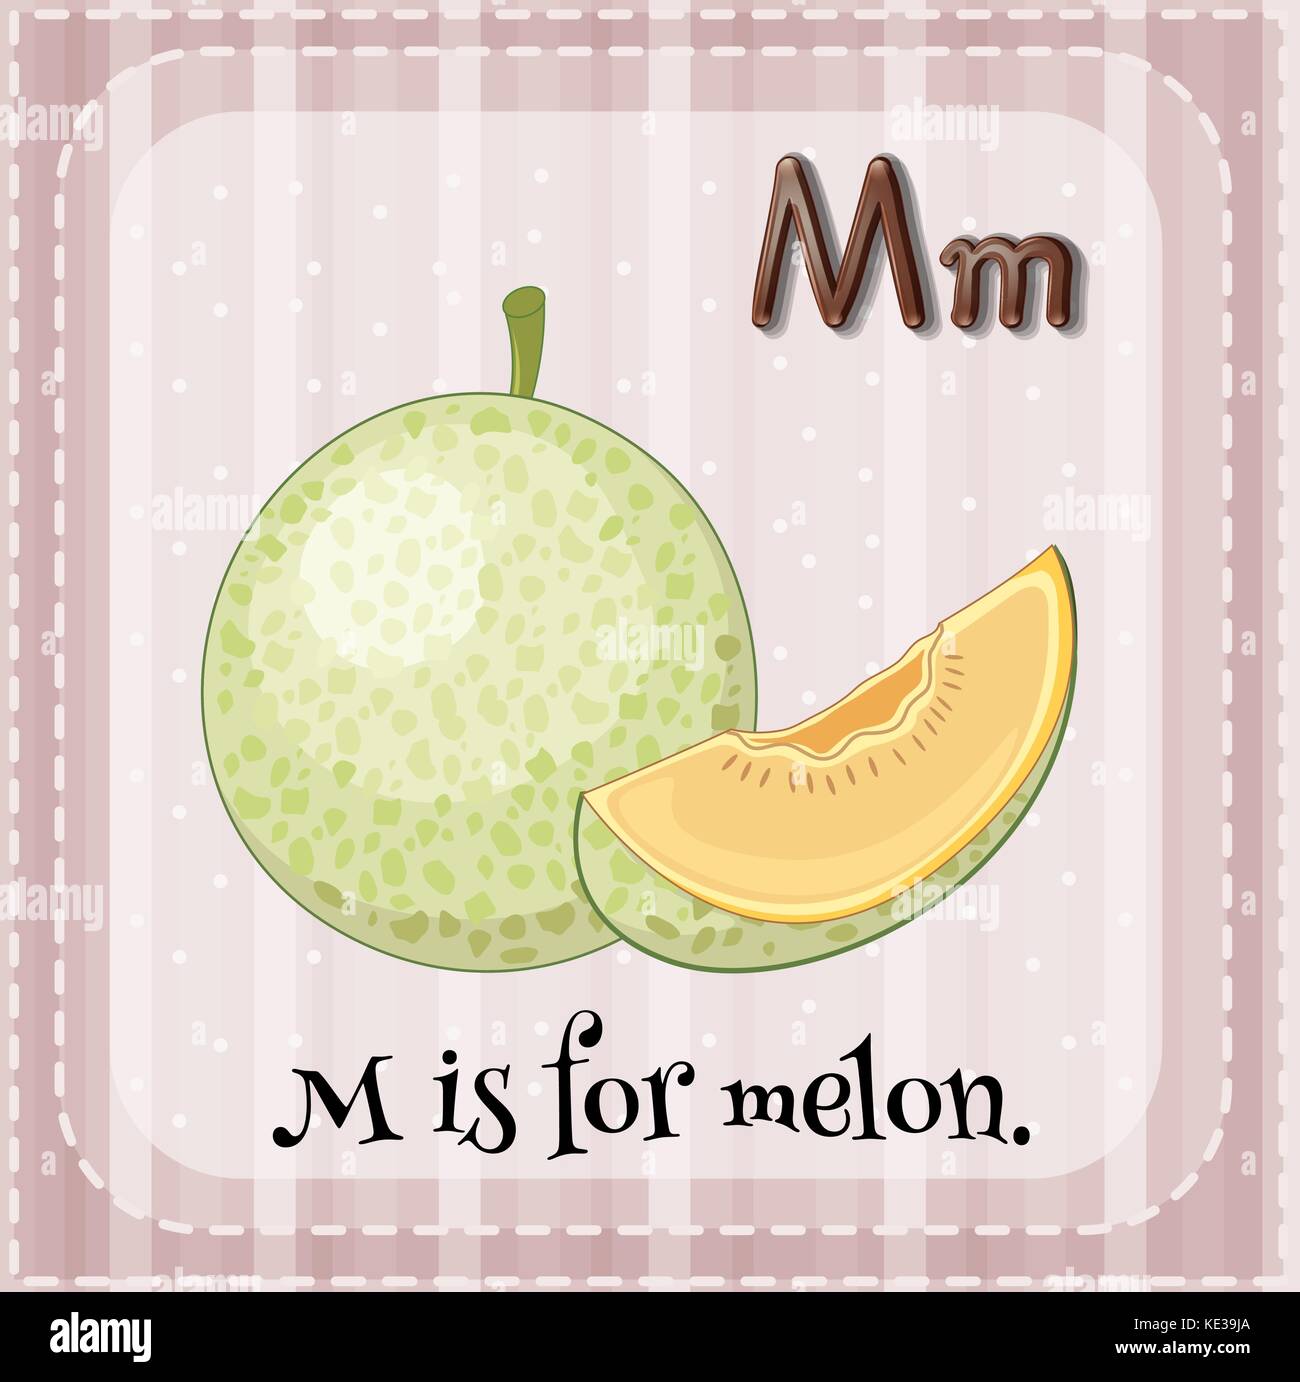 Flashcard letter M is for melon illustration Stock Vector